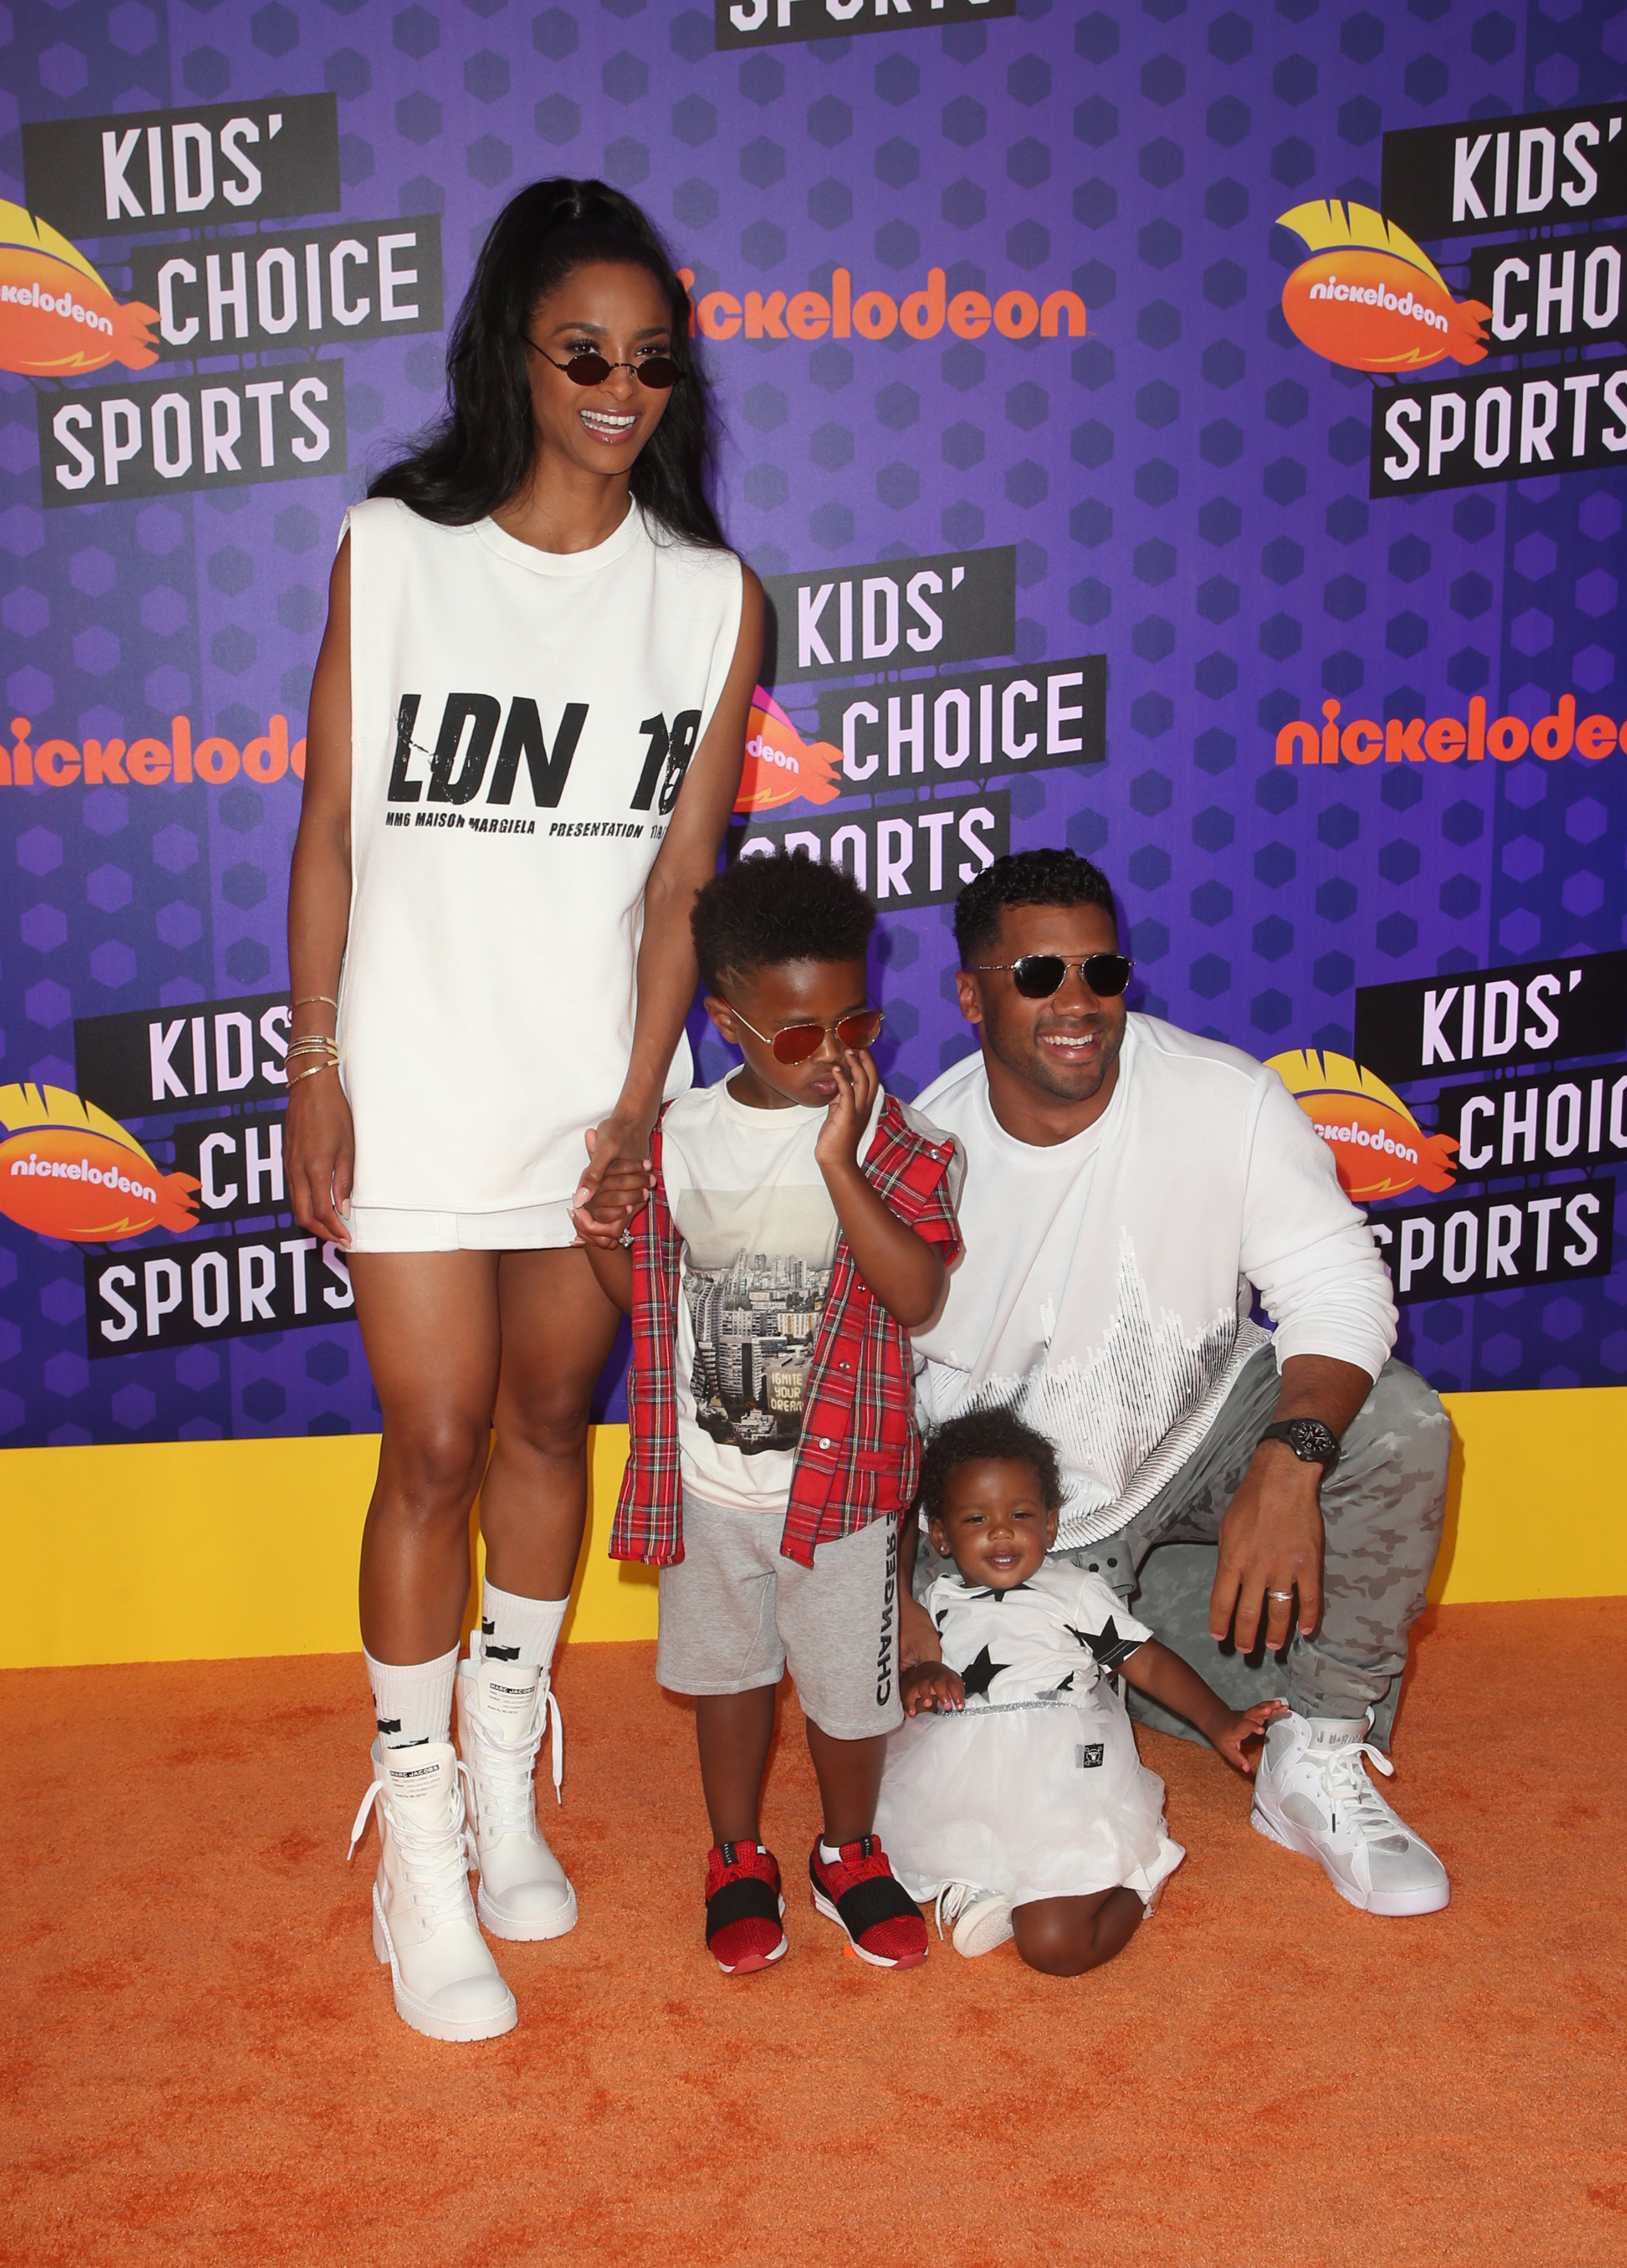 The Most Precious Pics From The Nickelodeon Kids Choice Sports Awards ...